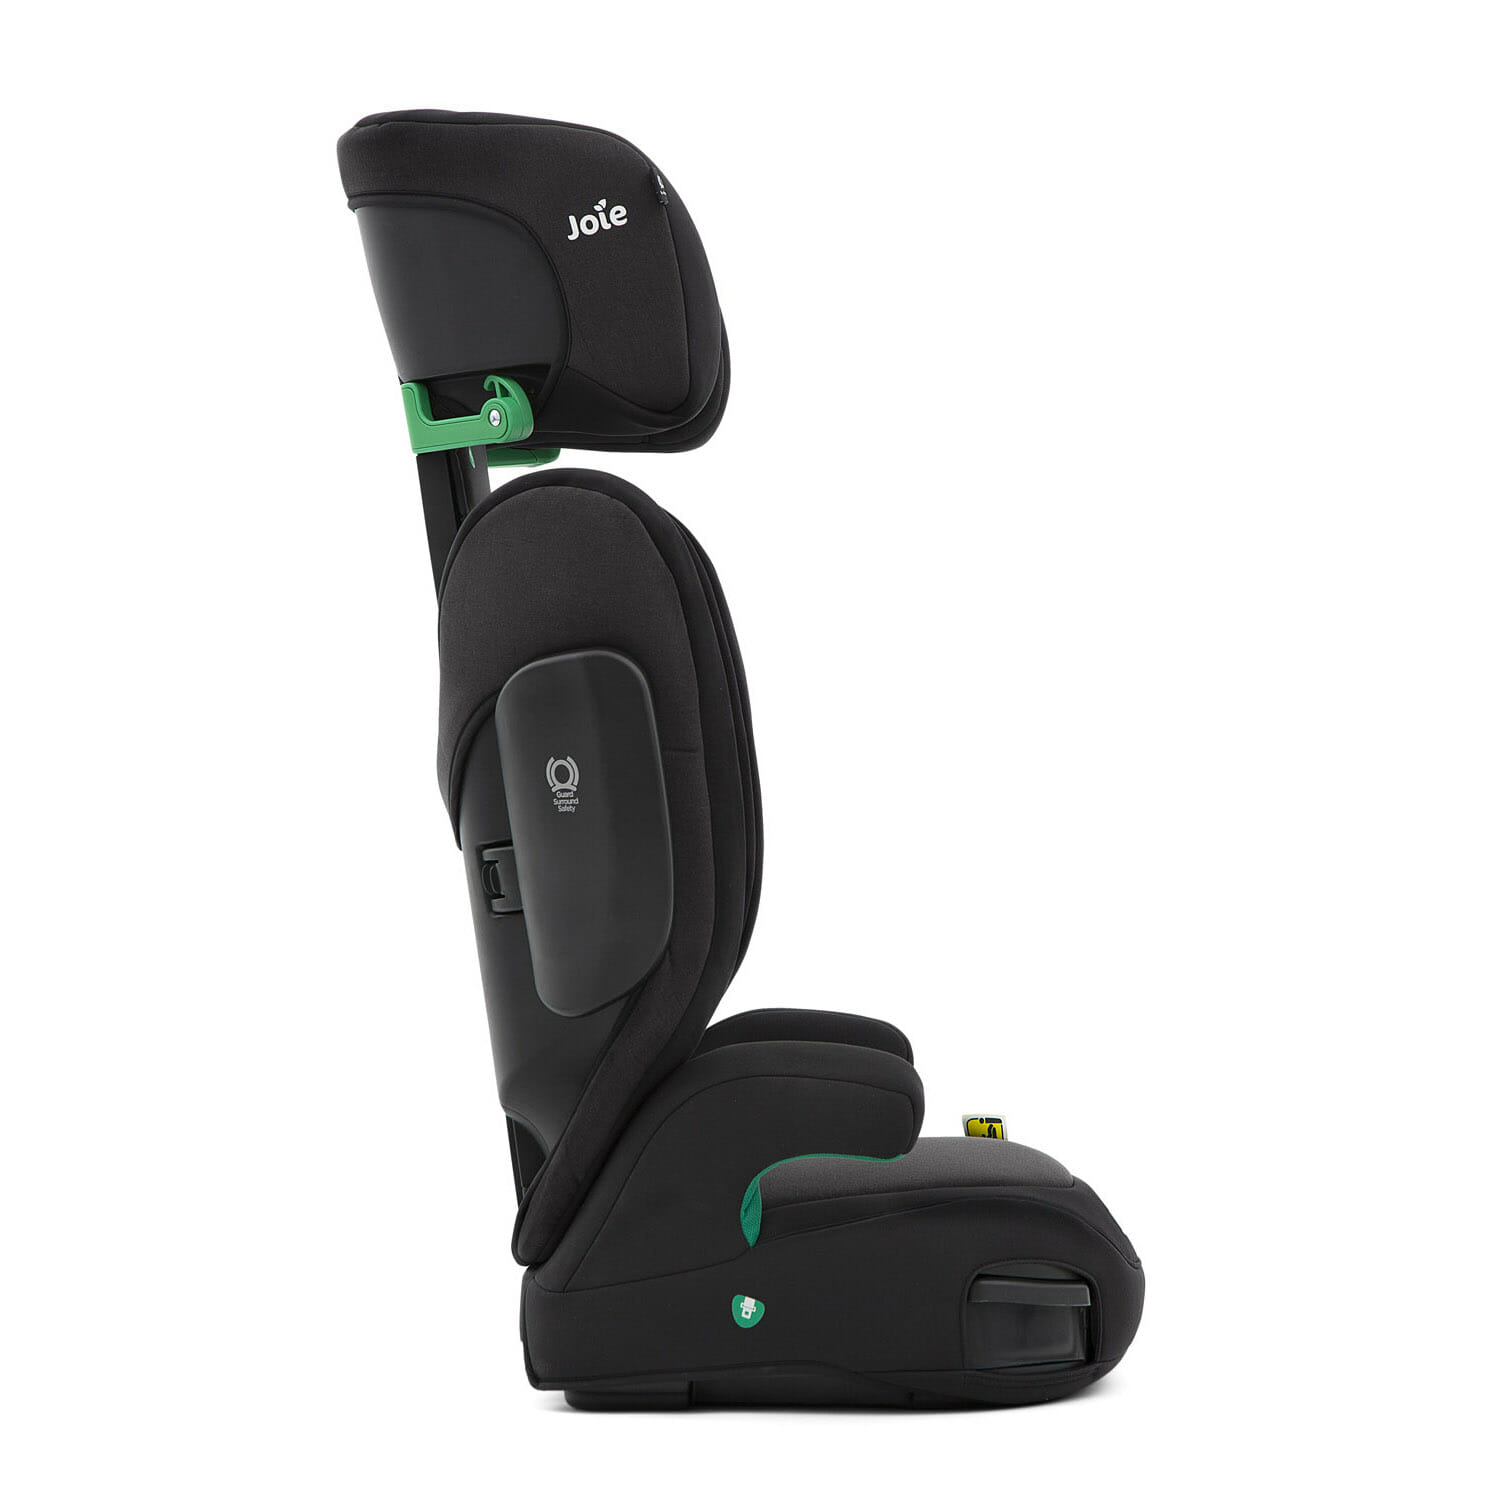 Joie i-Trillo Group 2/3 Car Seat - Shale